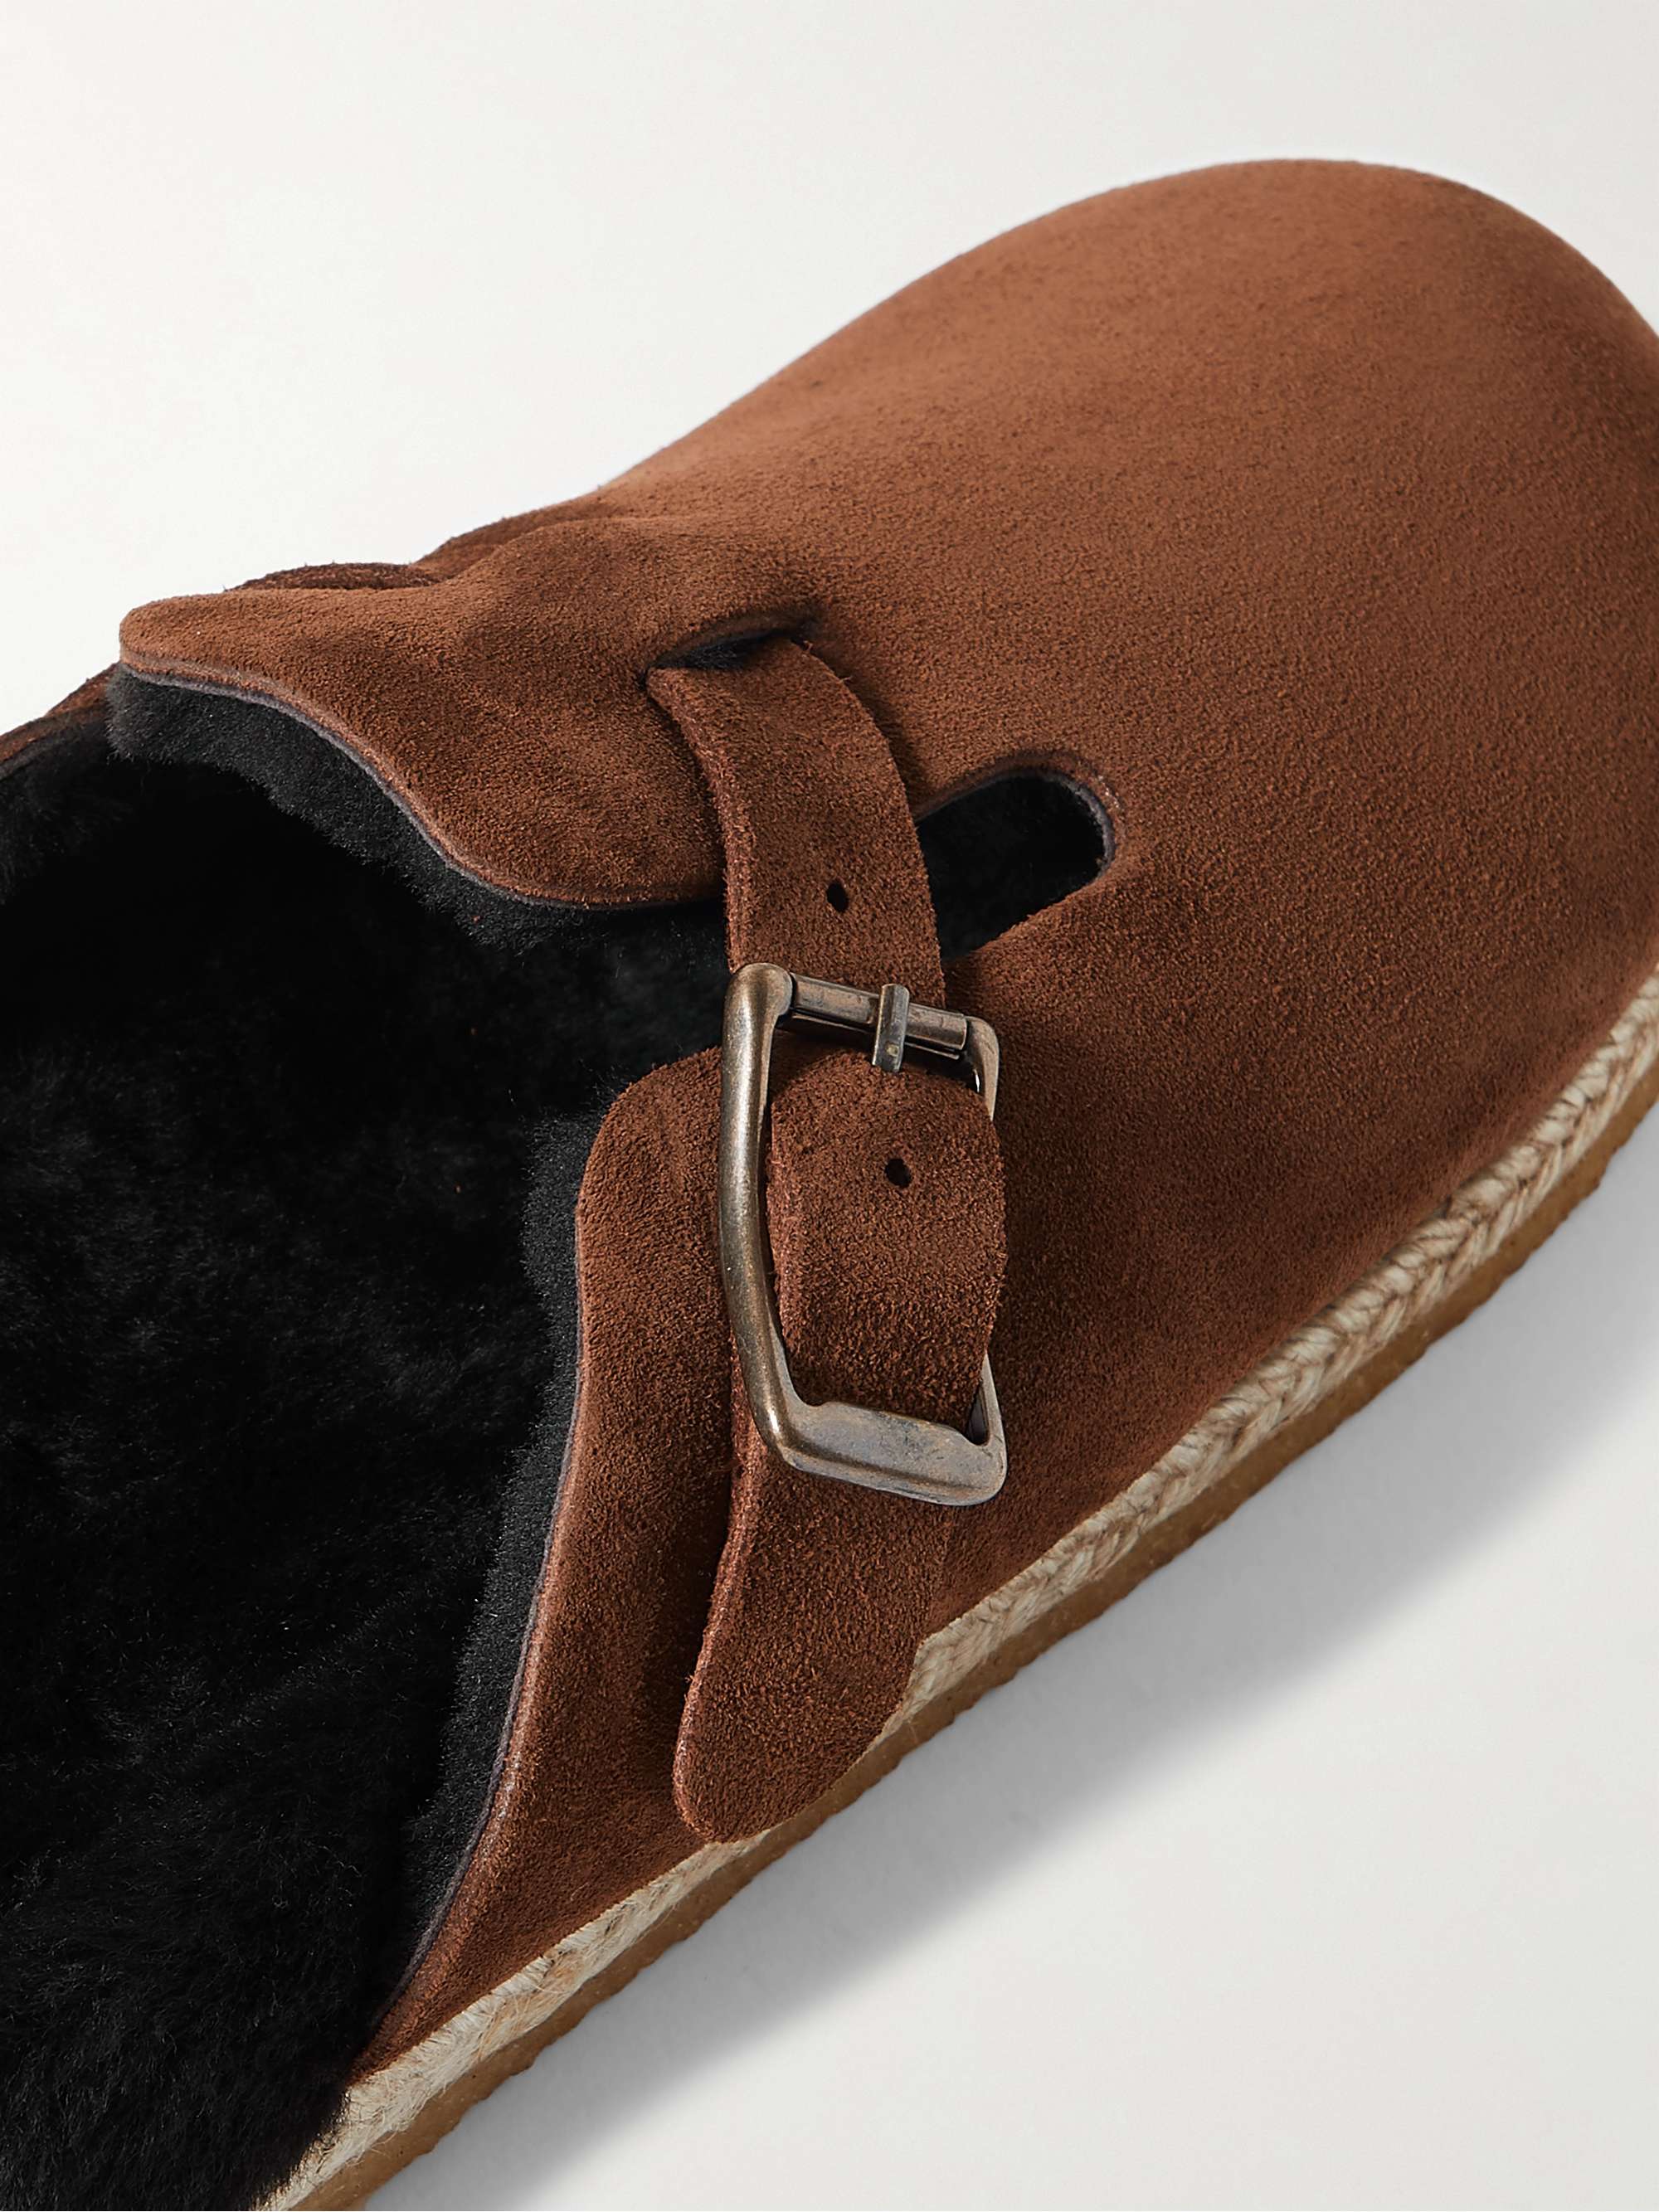 YUKETEN Sal-1 Shearling-Lined Suede Sandals